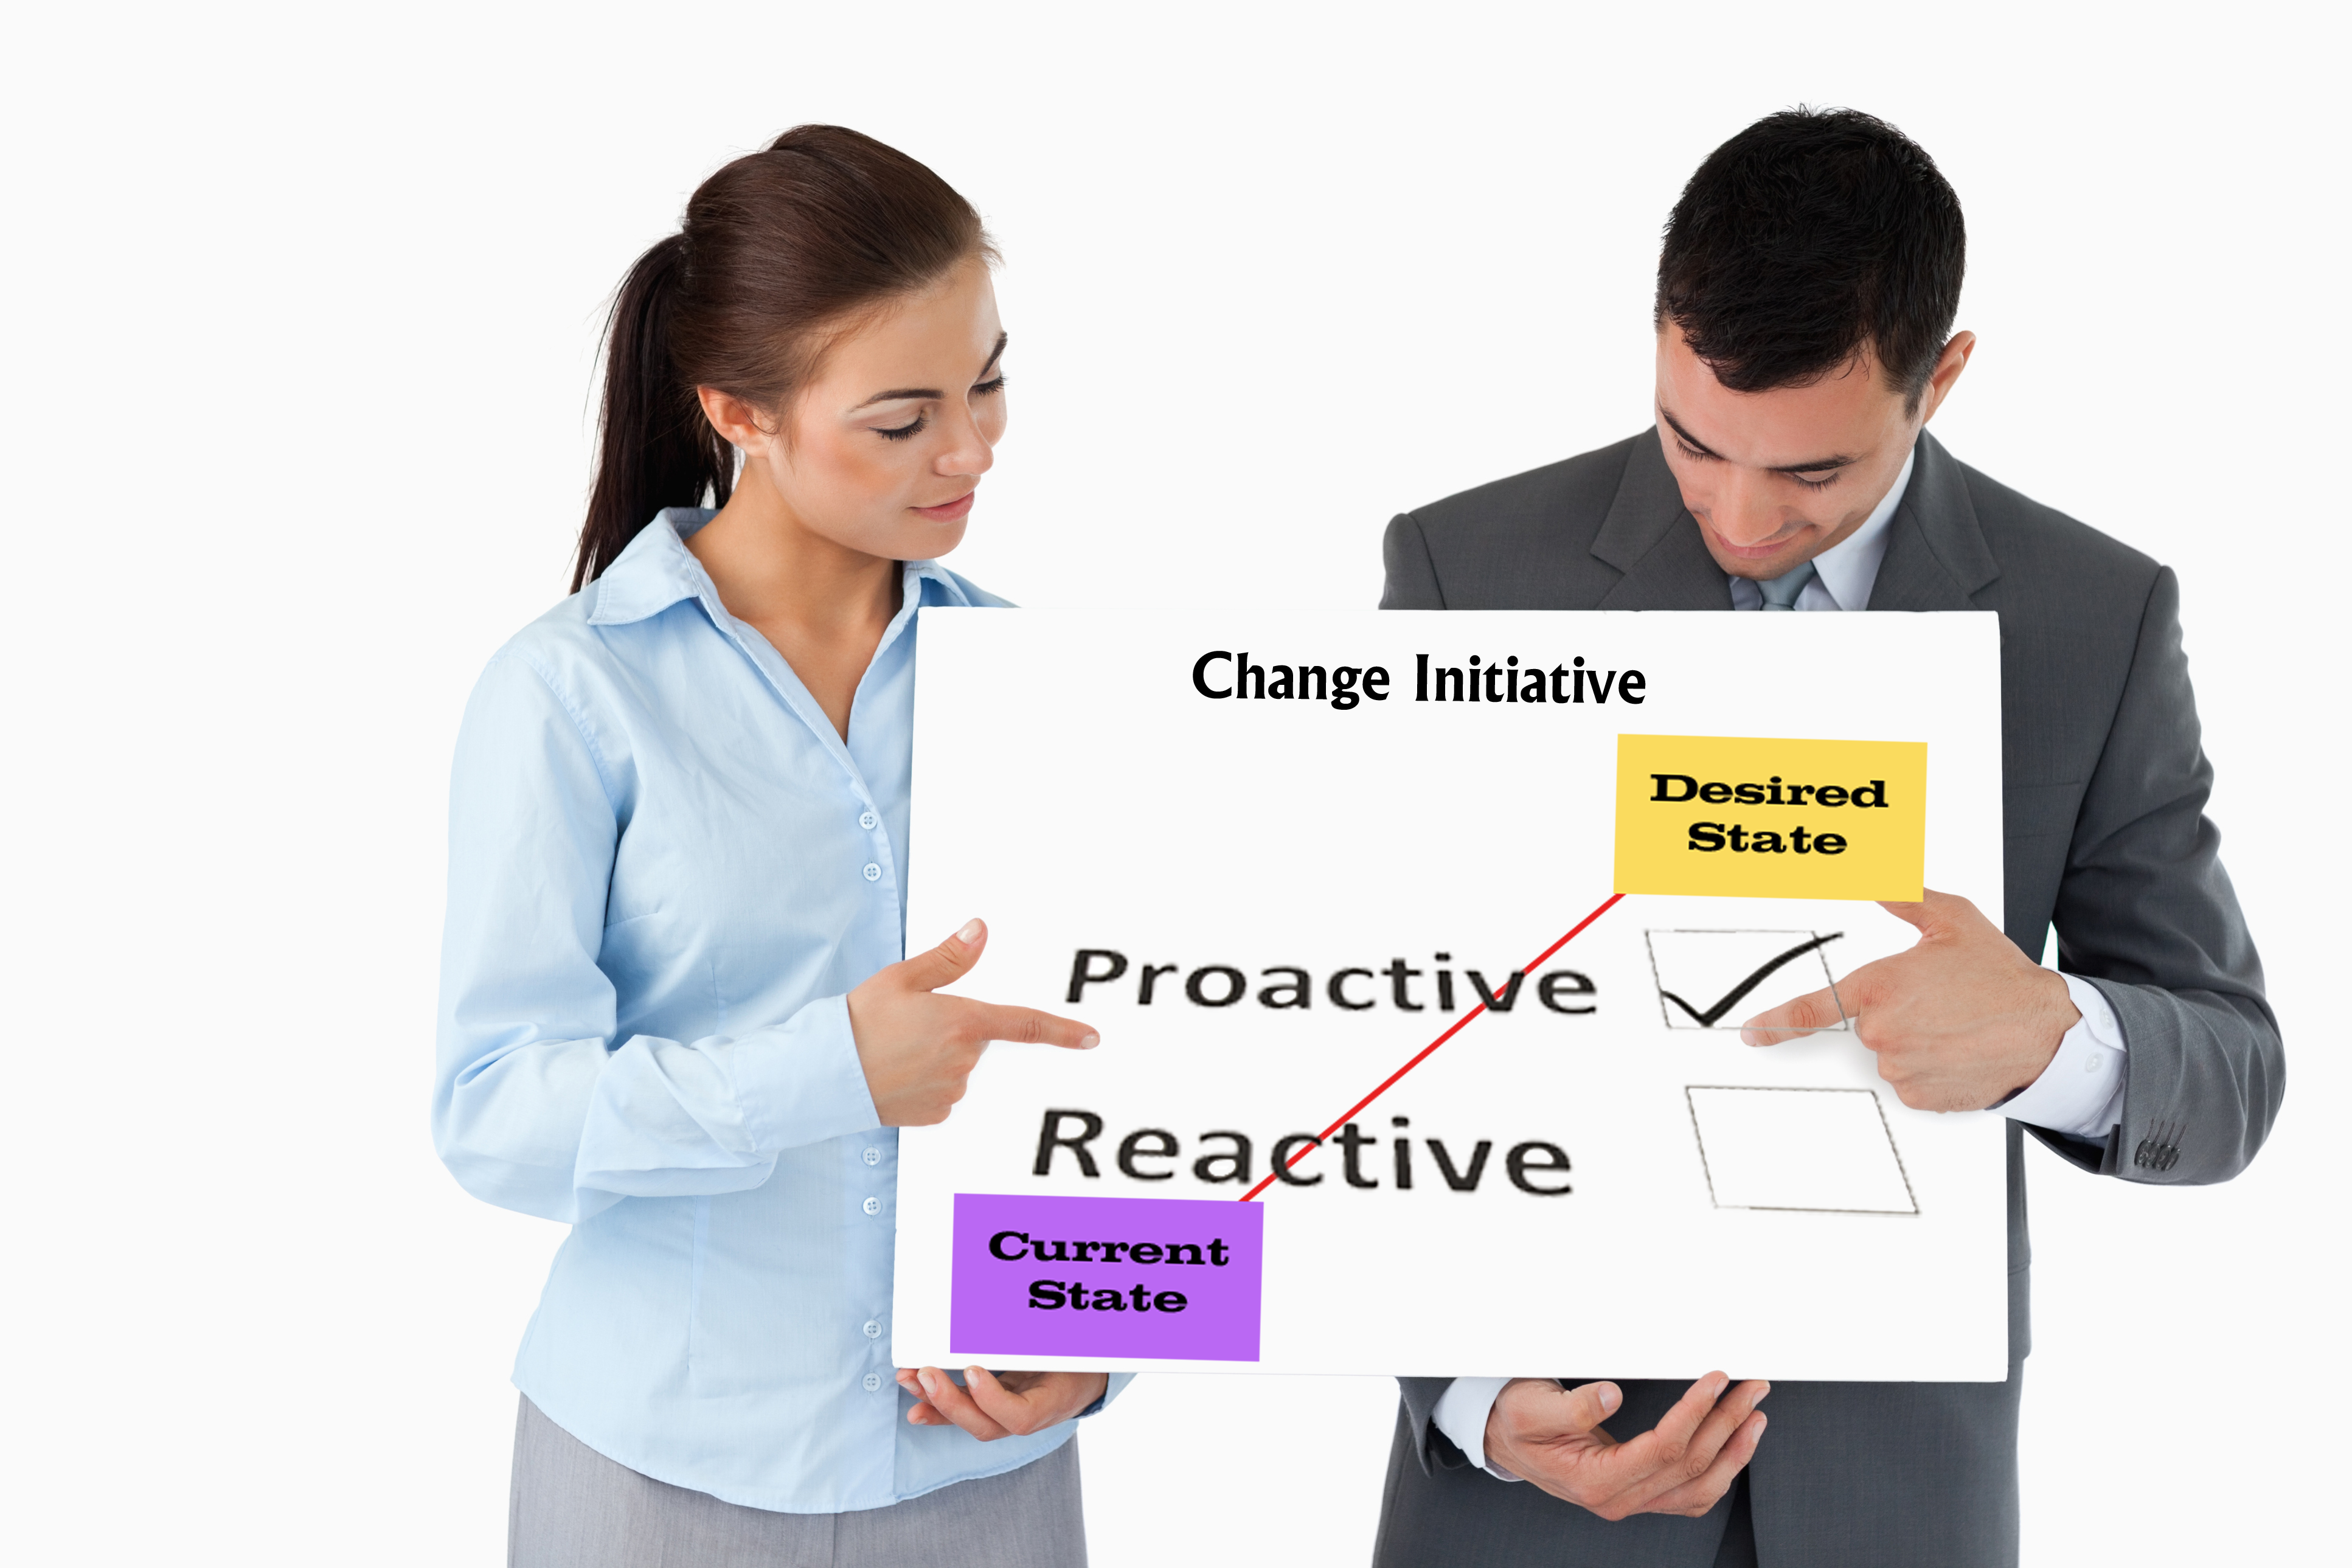 How HR Professionals Can Take Charge of Change